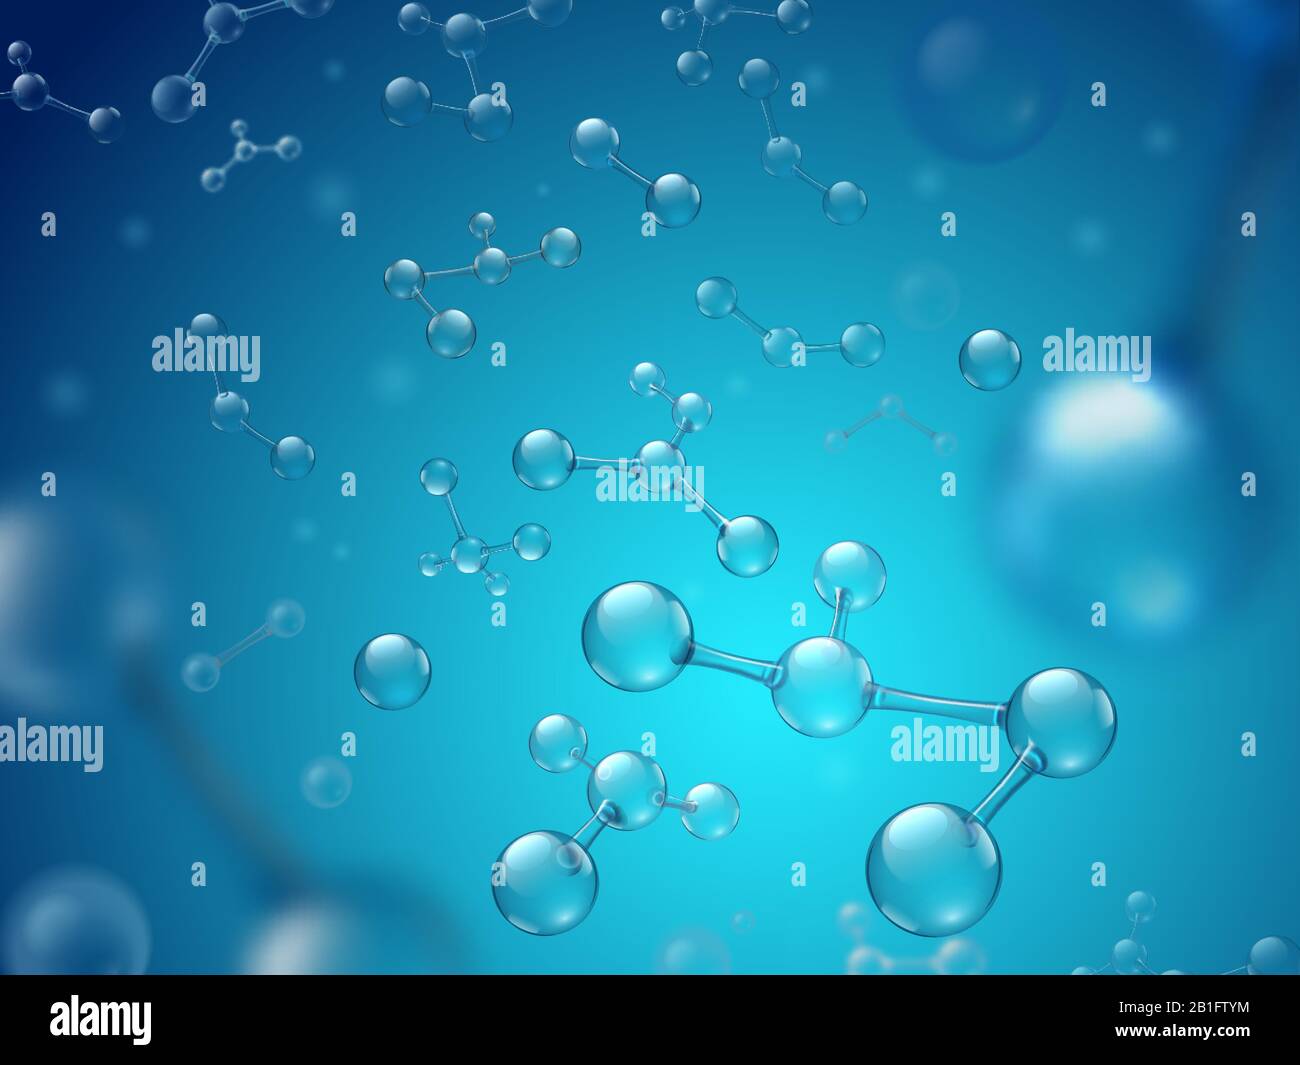 Hyaluronic acid molecules. Hydrated chemicals, molecular structure and blue spherical molecule 3d vector illustration Stock Vector